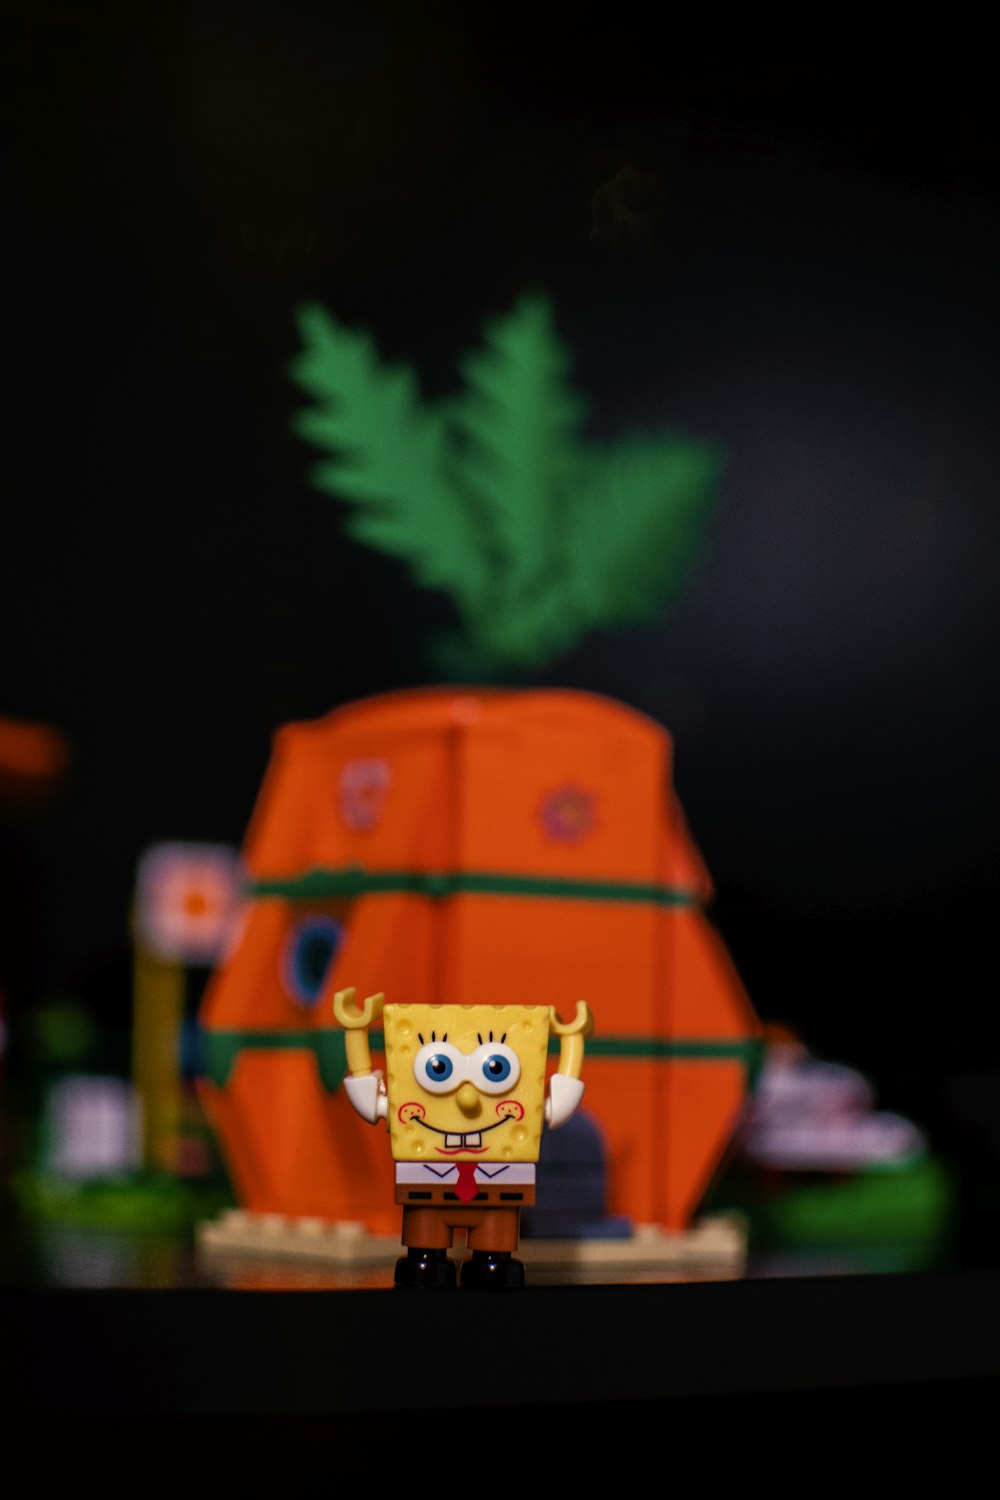 a toy spongebob is standing on a table